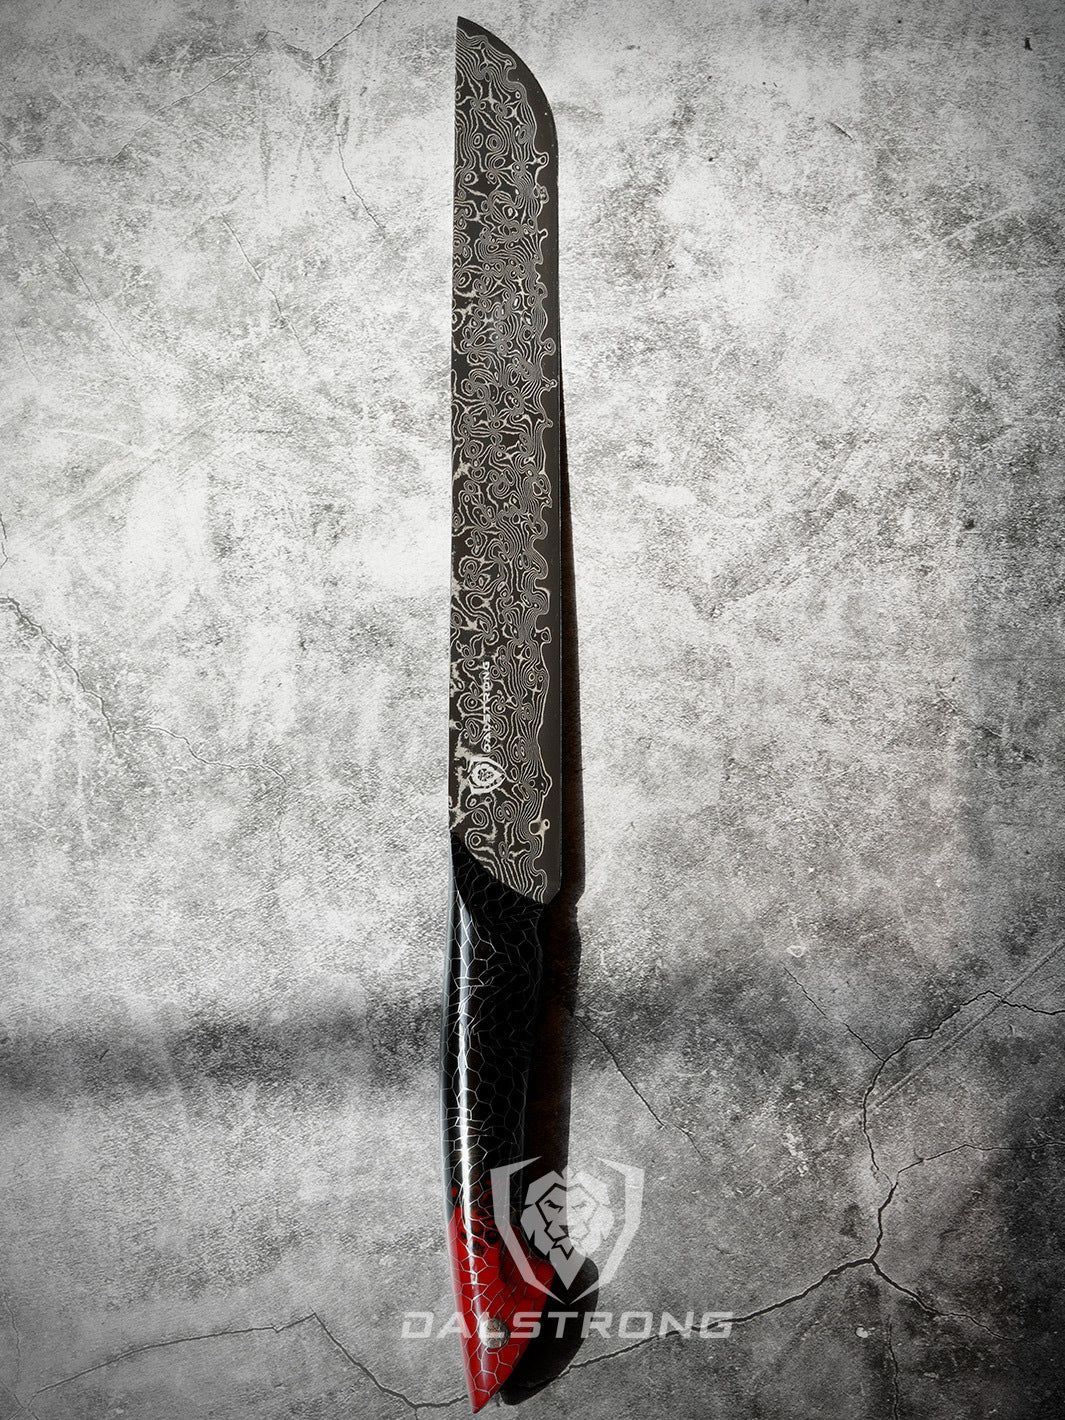 A man holding the Dalstrong scorpion series 11 inch slicing knife with red handle on a rough surface.